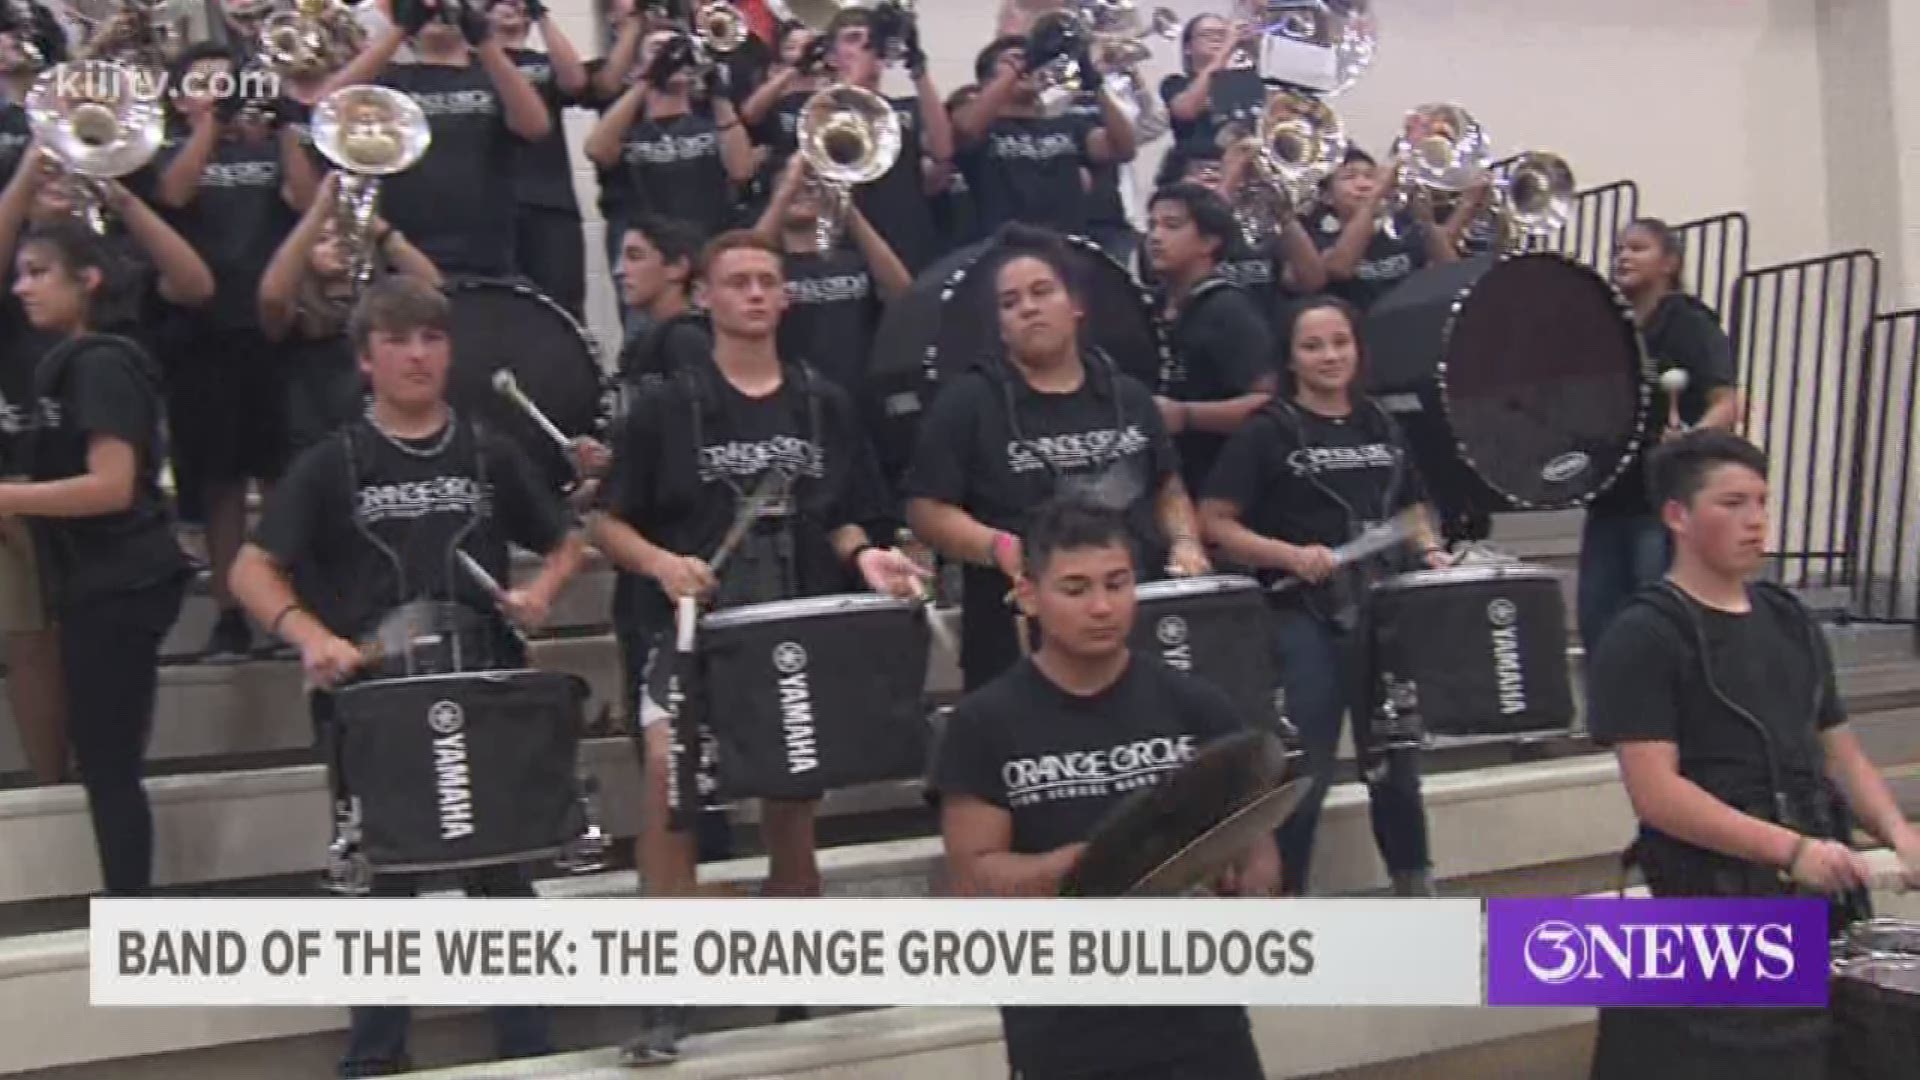 It's time for the Friday Night Sports Blitz, and that means crowning this weeks winner of the 3News Band of the Week contest -- the Orange Grove Bulldogs!